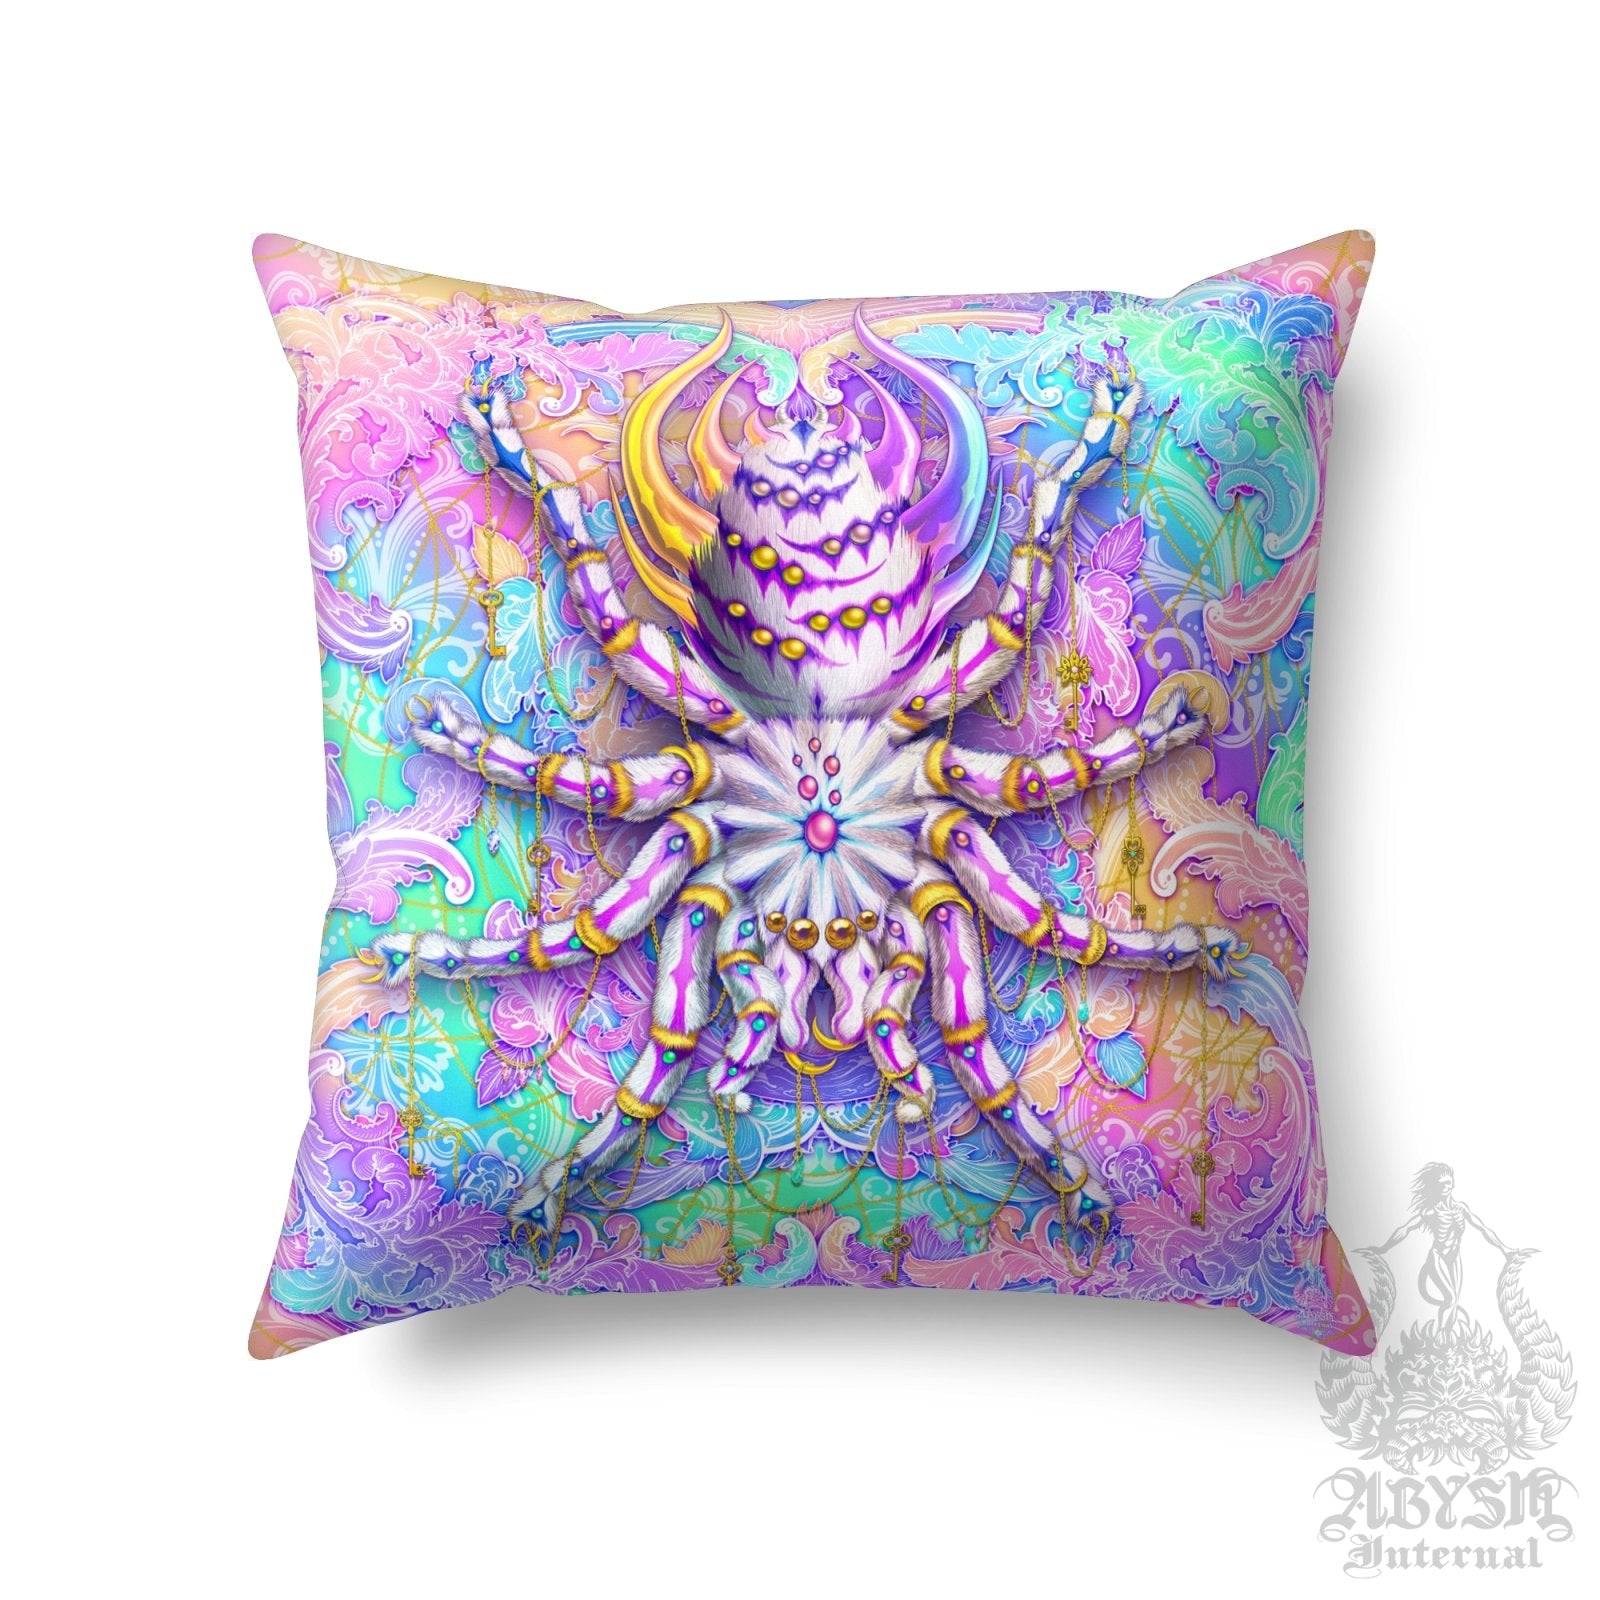 Aesthetic Throw Pillow, Decorative Accent Cushion, Holographic Pastel Room Decor, Funky and Eclectic Home - Tarantula, Psychedelic Art, Spider - Abysm Internal